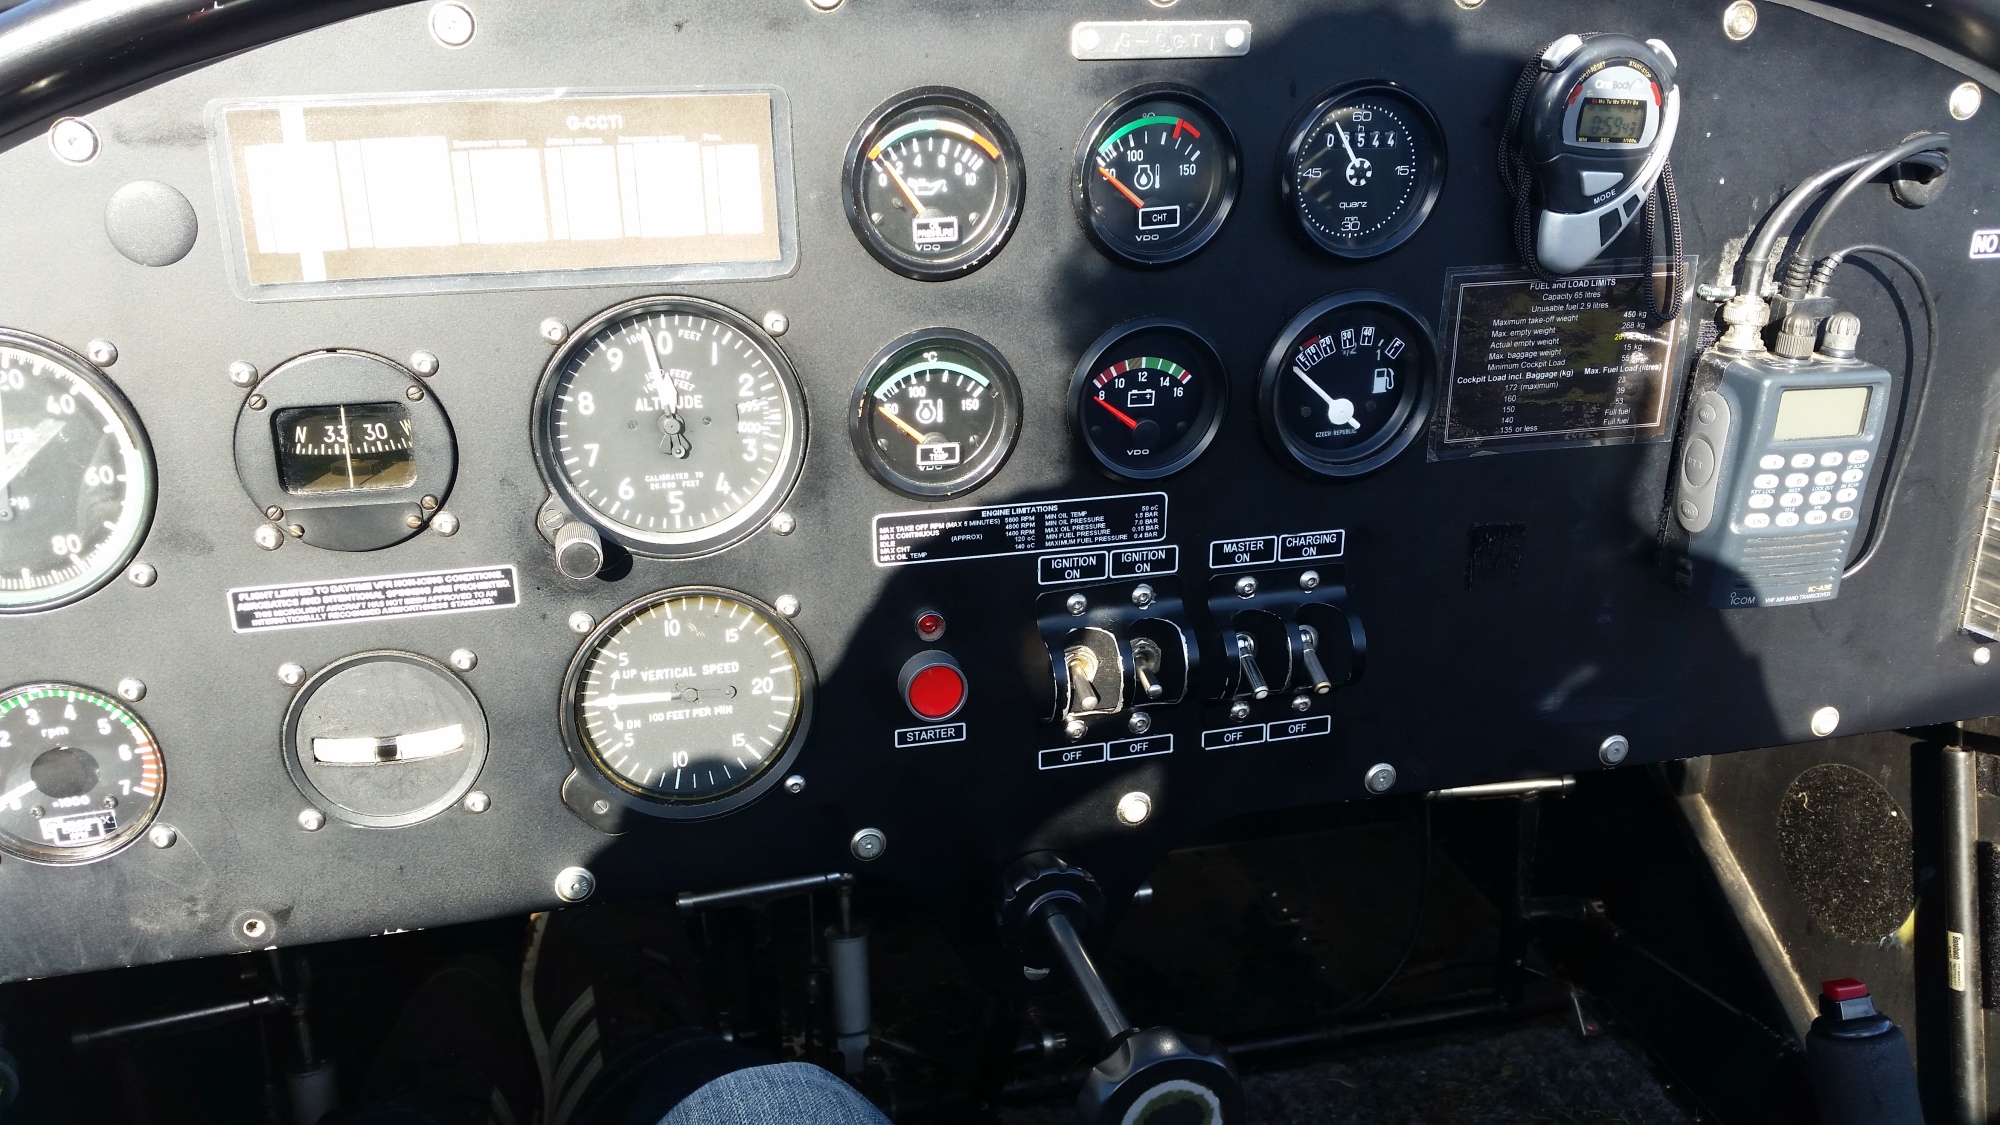 The instruments and controls of a microlight